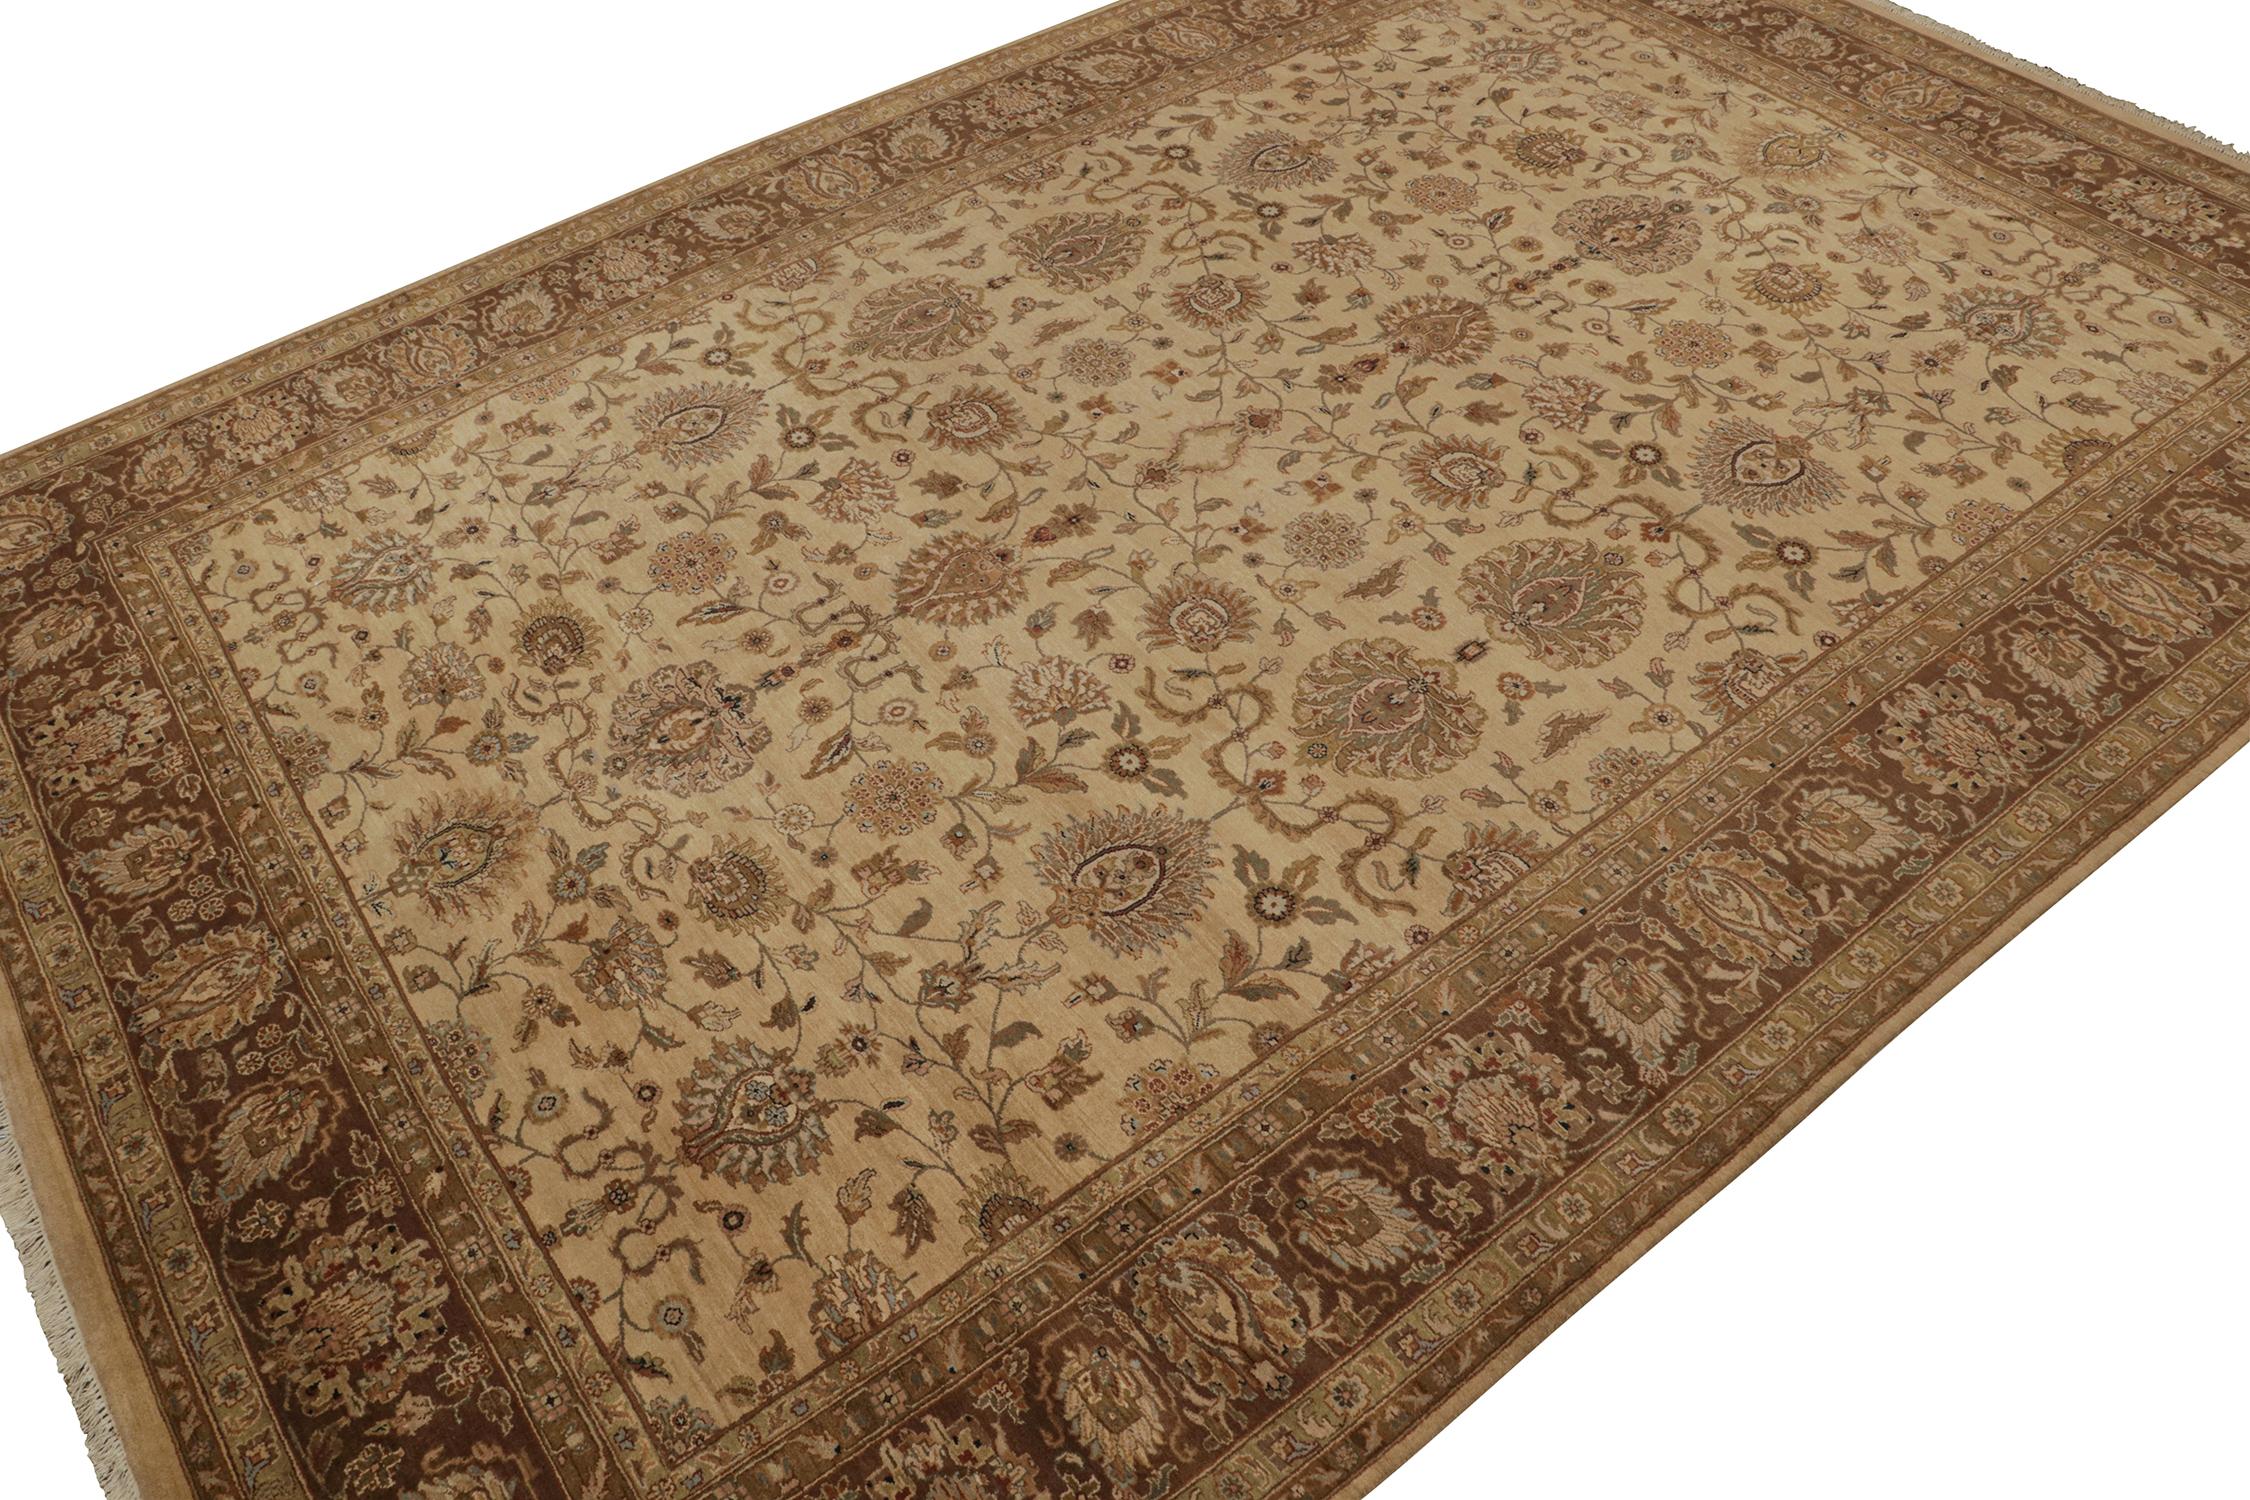 This 12x18 hand-knotted wool rug from our Modern Classics collection is an ode to regal antique Tabriz Persian rugs. 

A grand scale hosts the finest floral detailing & palmettes in rich beige-brown & gold, with kisses of other vivid colors. A